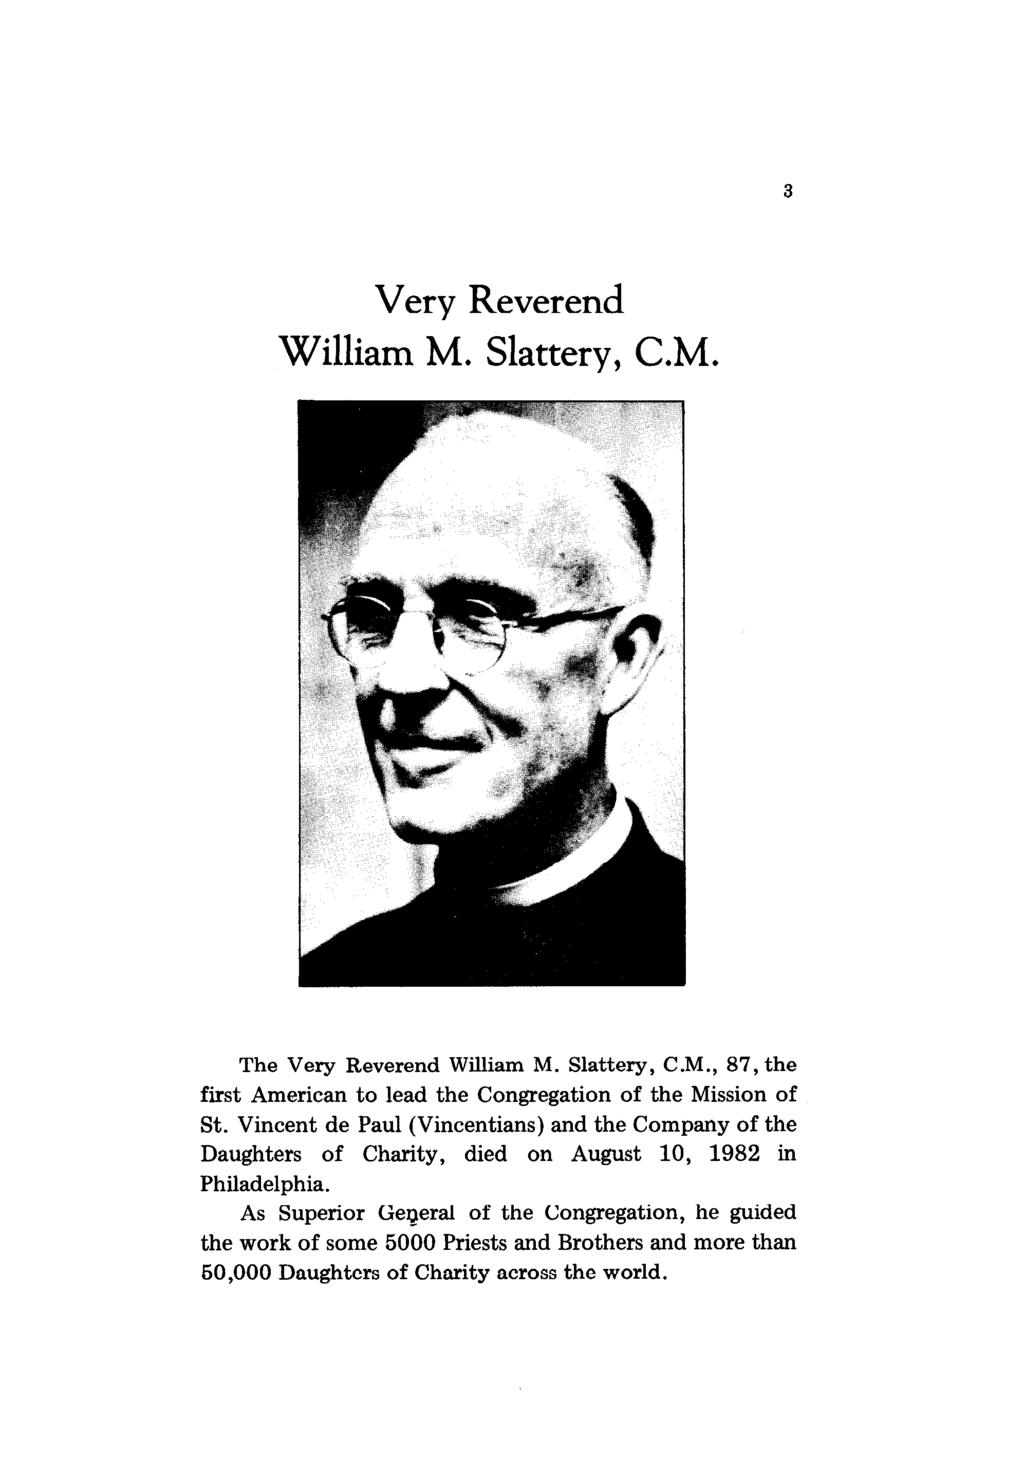 3 Very Reverend William M. Slattery, C.M. The Very Reverend William M. Slattery, C.M., 87, the first American to lead the Congregation of the Mission of St.